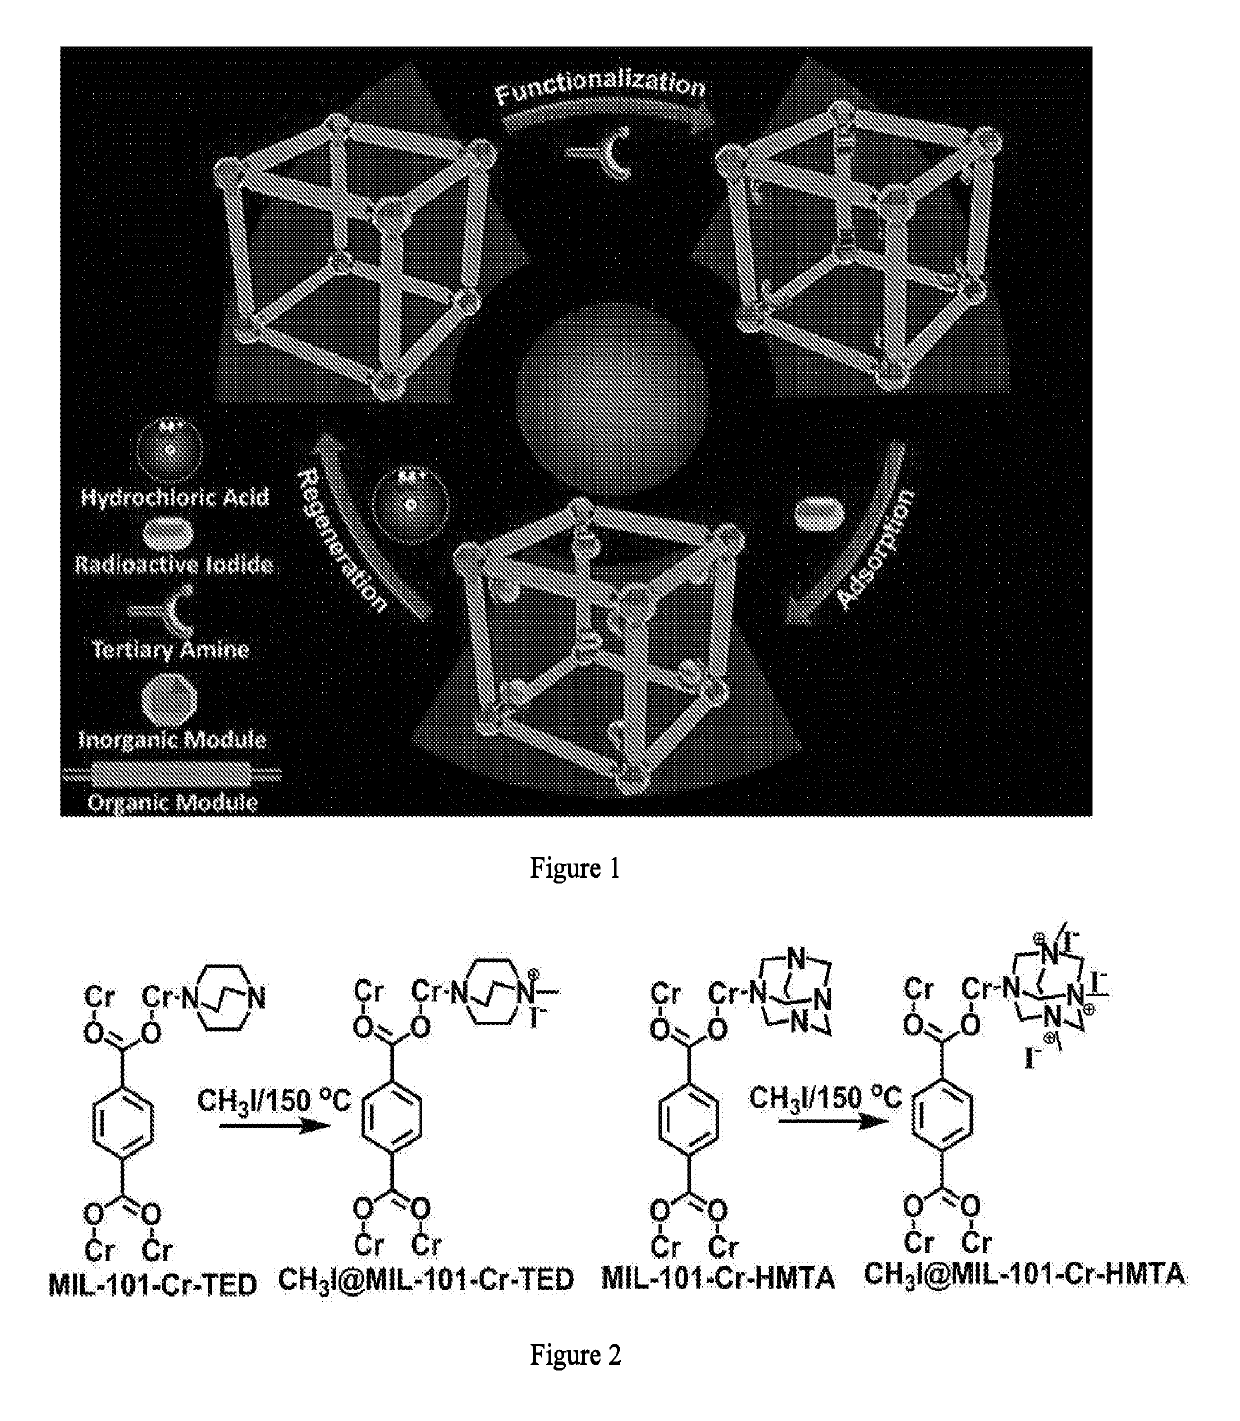 Metal-Organic Framework Based Molecular Traps for Capture of Radioactive Organic Iodides from Nuclear Waste